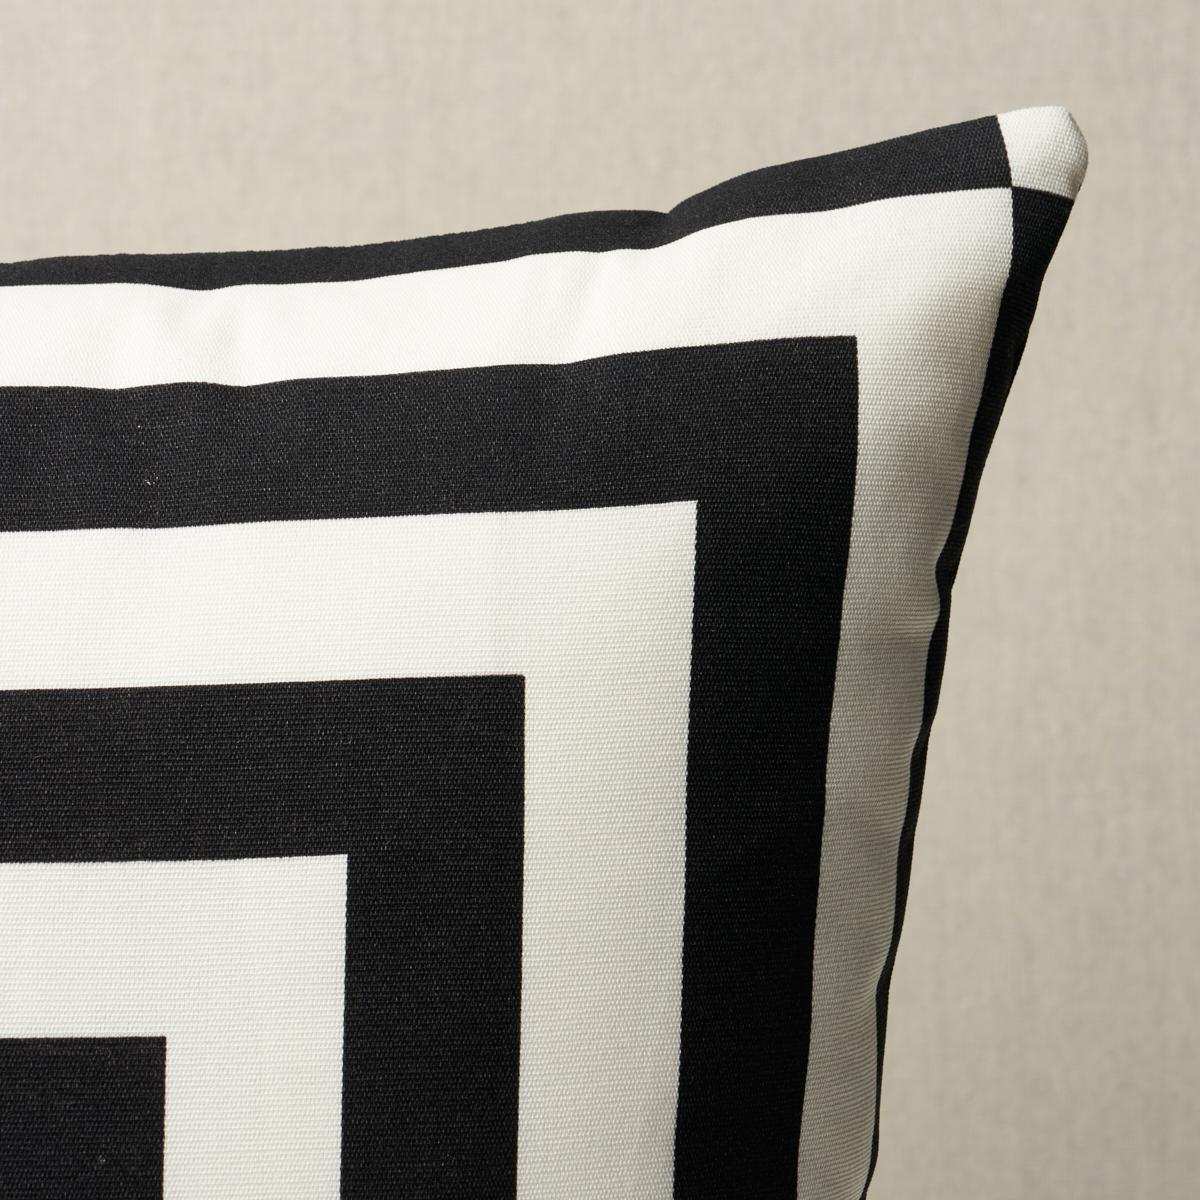 This pillow features Roxbury Indoor/Outdoor with a knife edge finish. A graphic large-scale design, Roxbury Indoor/Outdoor in black is a bold geometric that invites pattern play. Pillow includes a polyfill insert and hidden zipper closure.